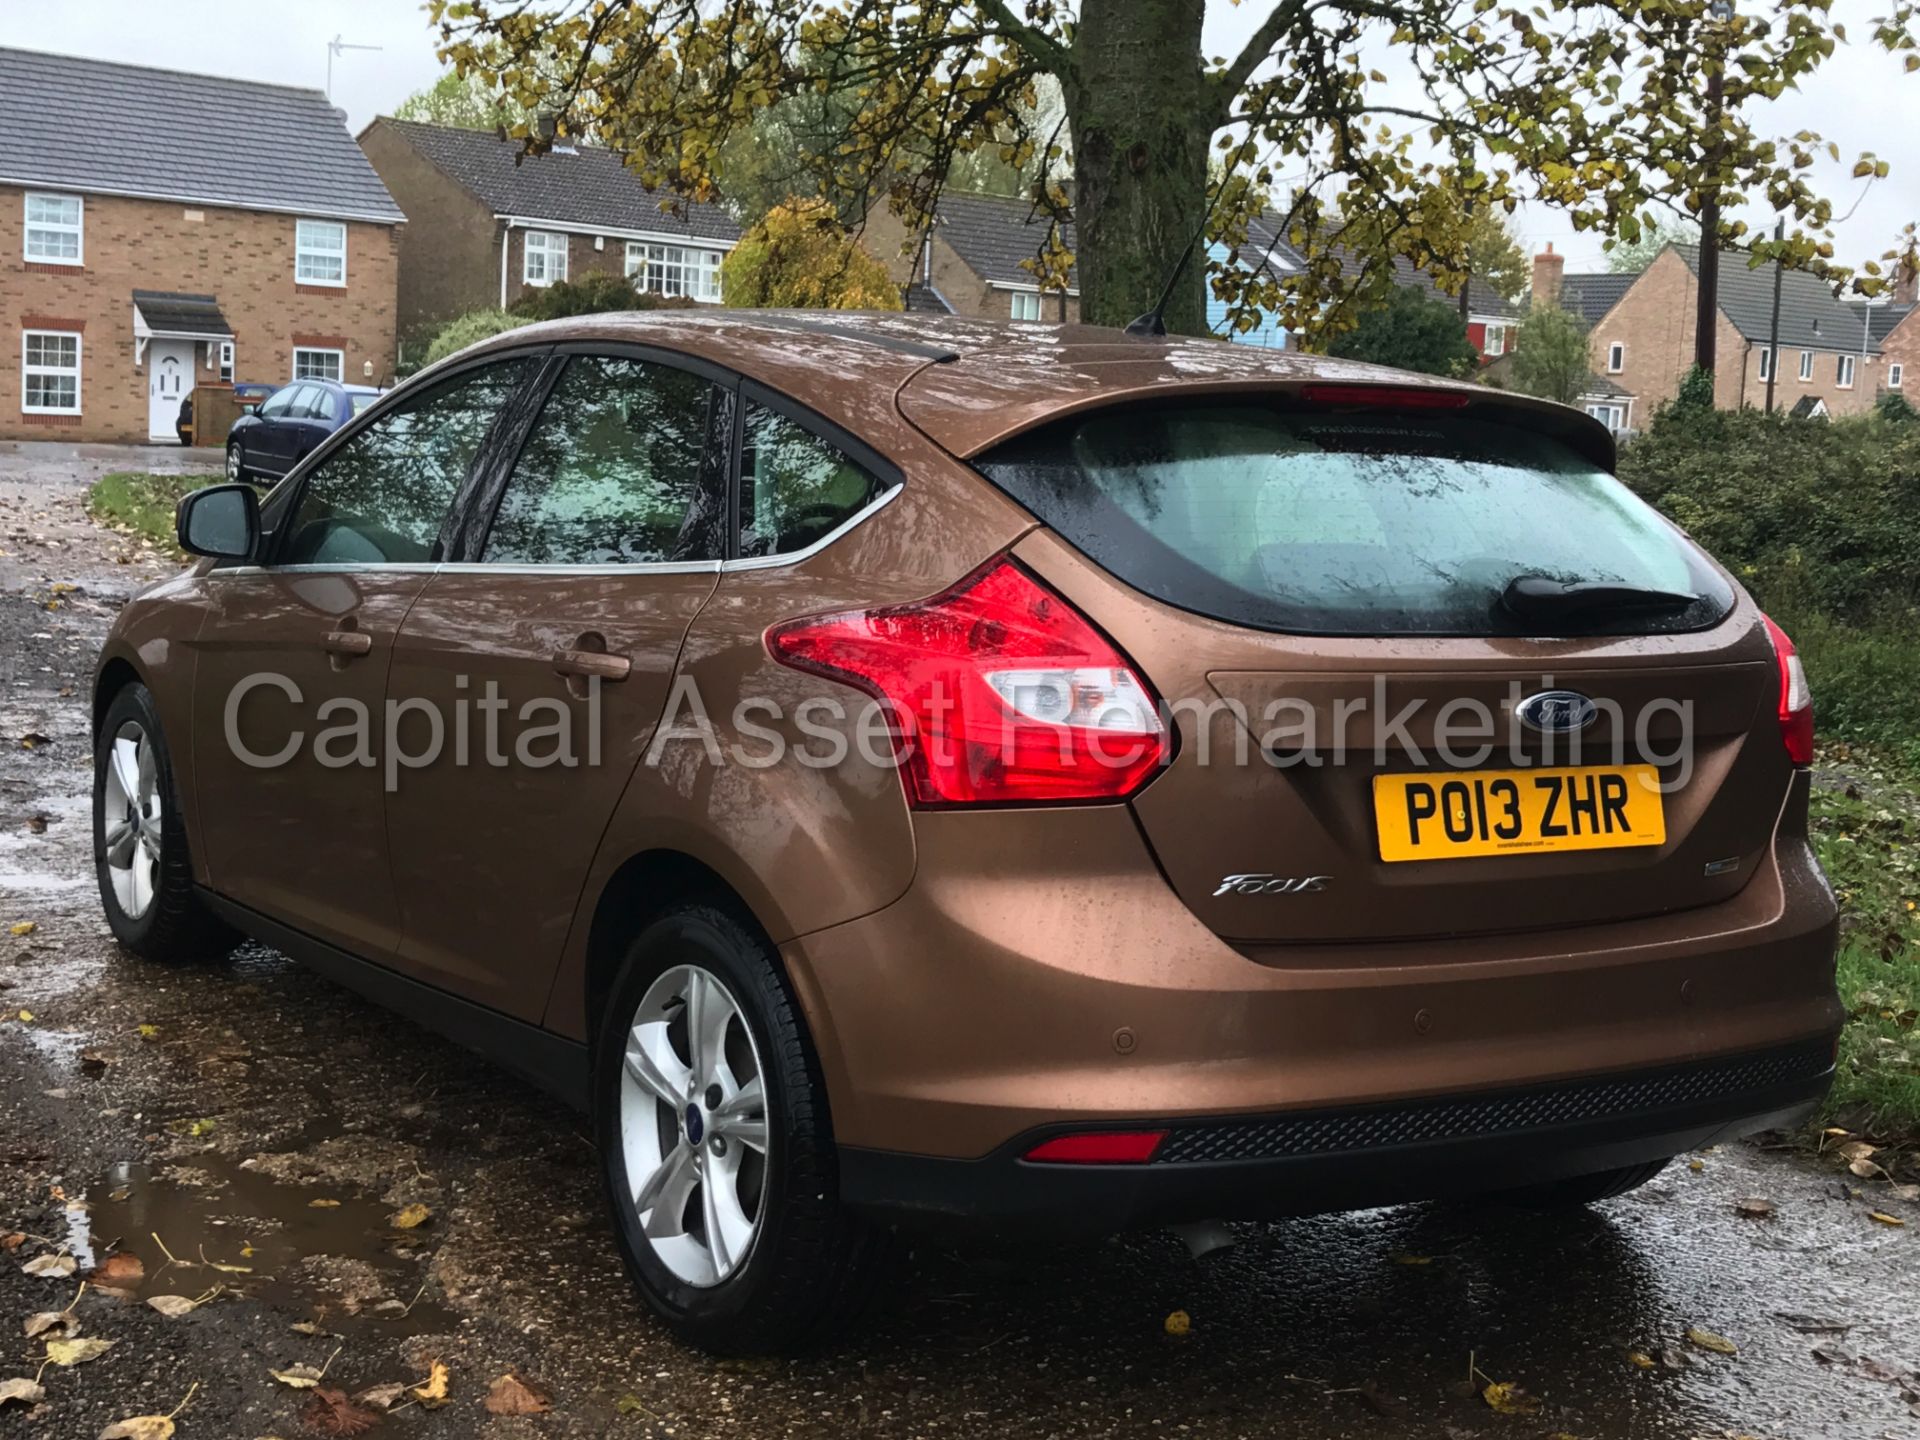 (On Sale) FORD FOCUS 'ZETEC' (2013 - 13 REG) '1.6 TDCI - 6 SPEED - STOP / START - AIR CON - 65 MPG+ - Image 3 of 24